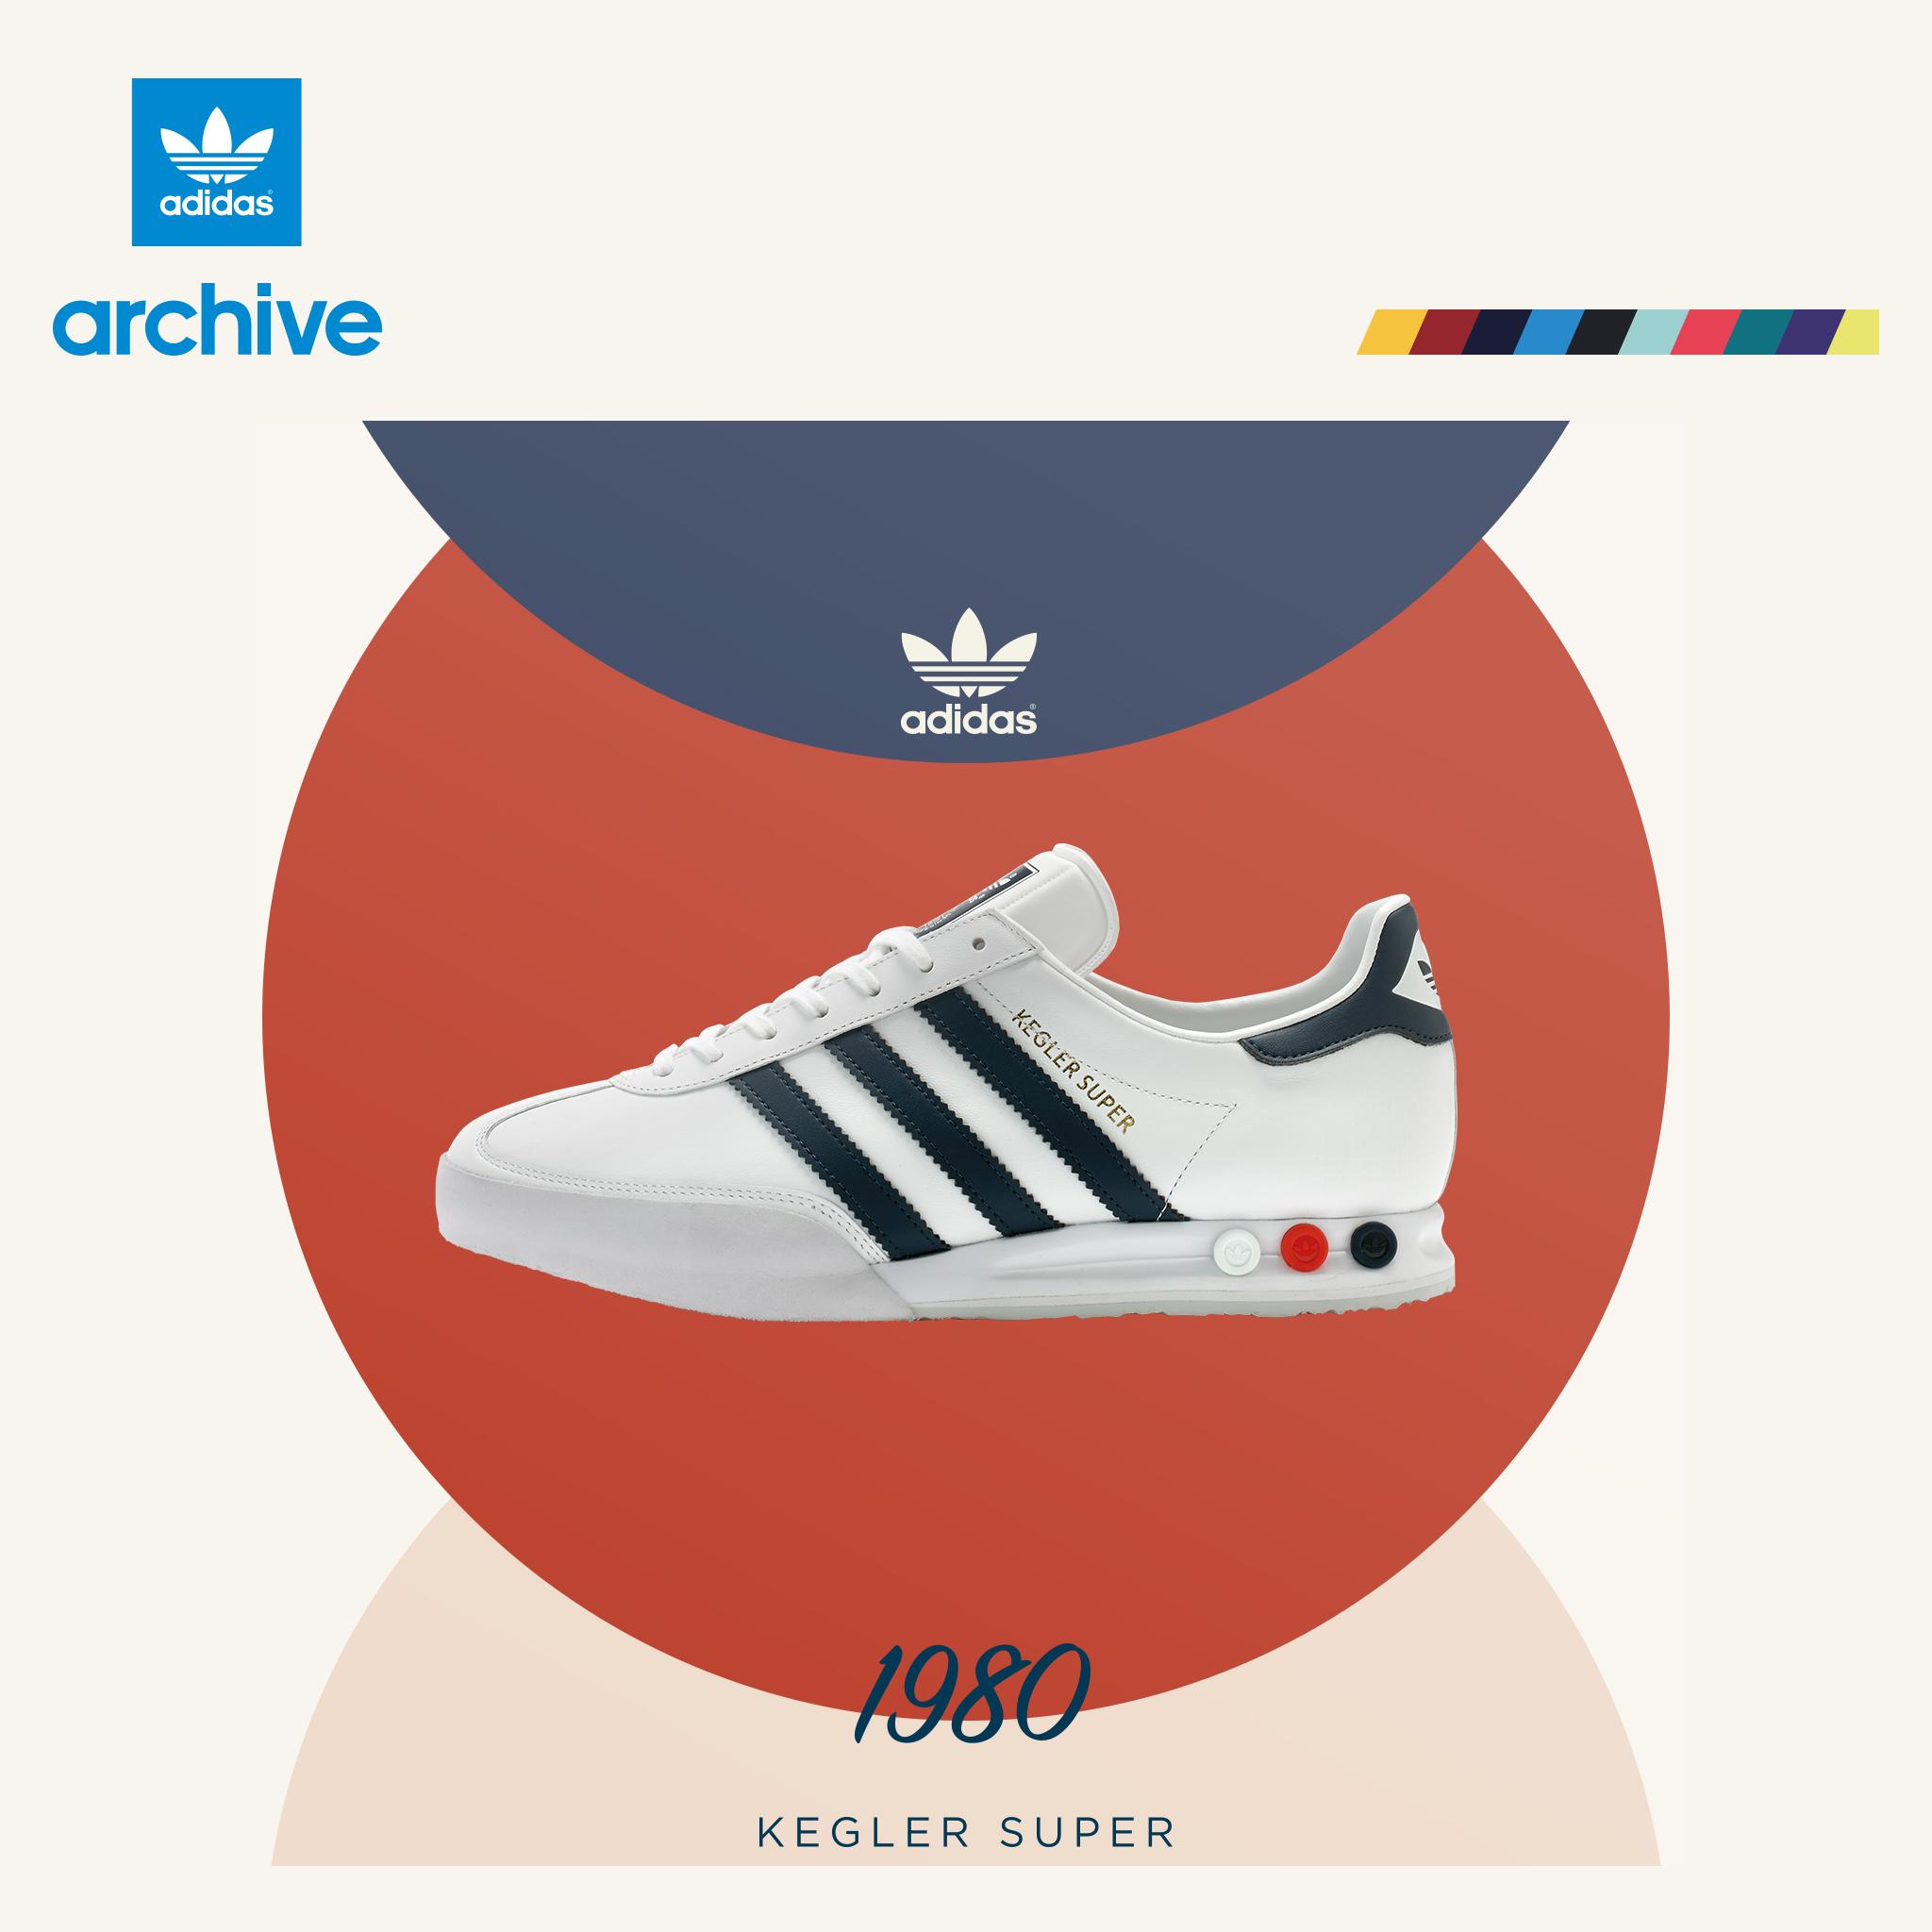 size? on Twitter: "OUT NOW! The adidas Originals Kegler Super White/Navy is available priced at £80: http://t.co/KkBrvcTuot http://t.co/d2Bb89lyOL" / Twitter